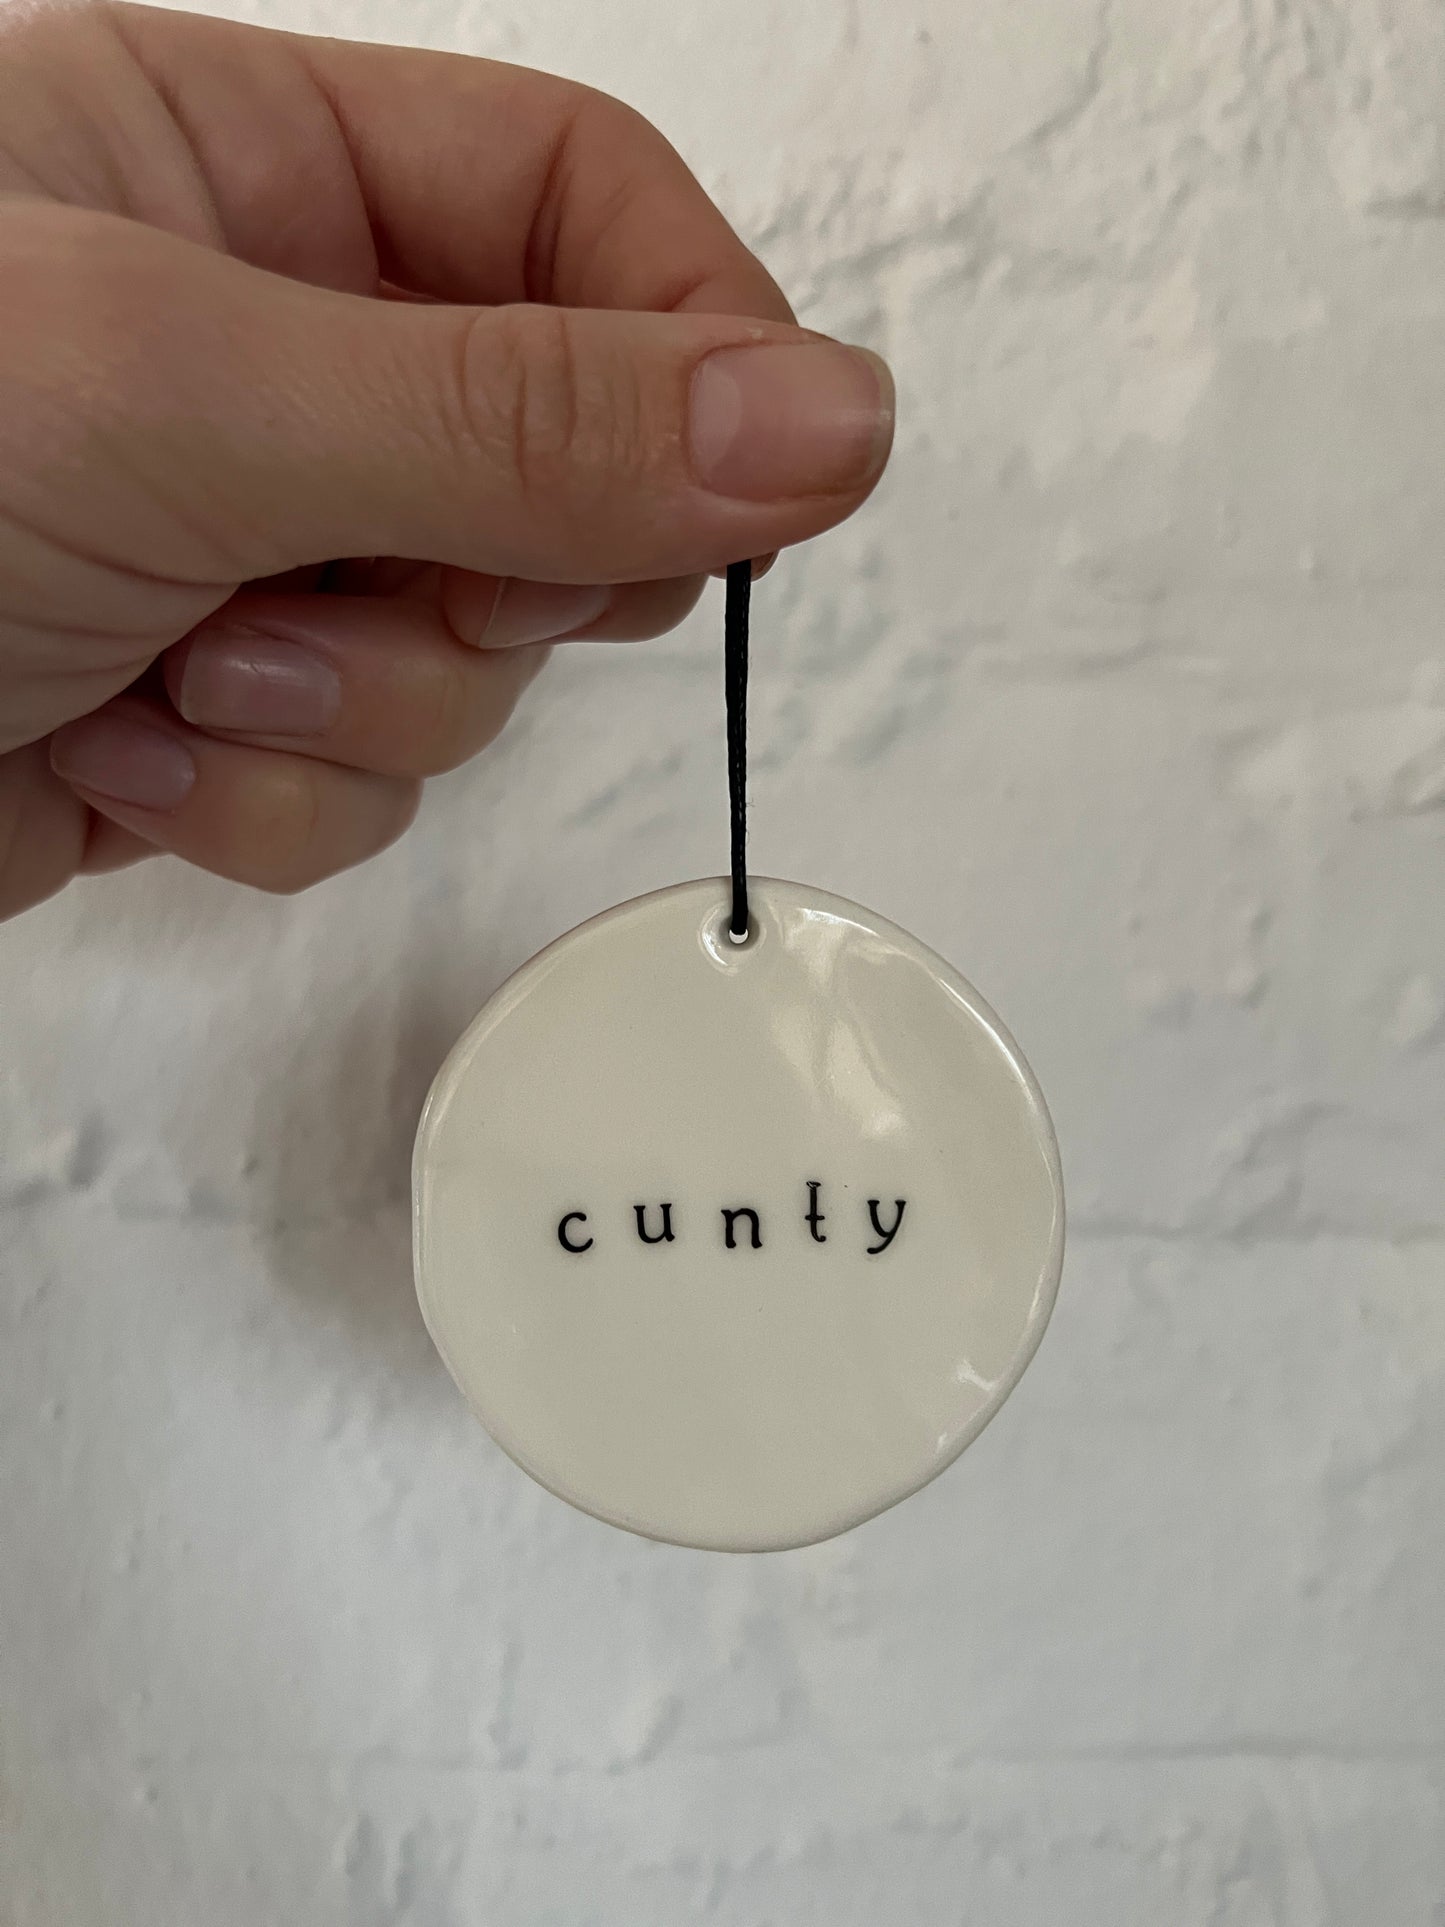 Cunty Limited Edition Decorations